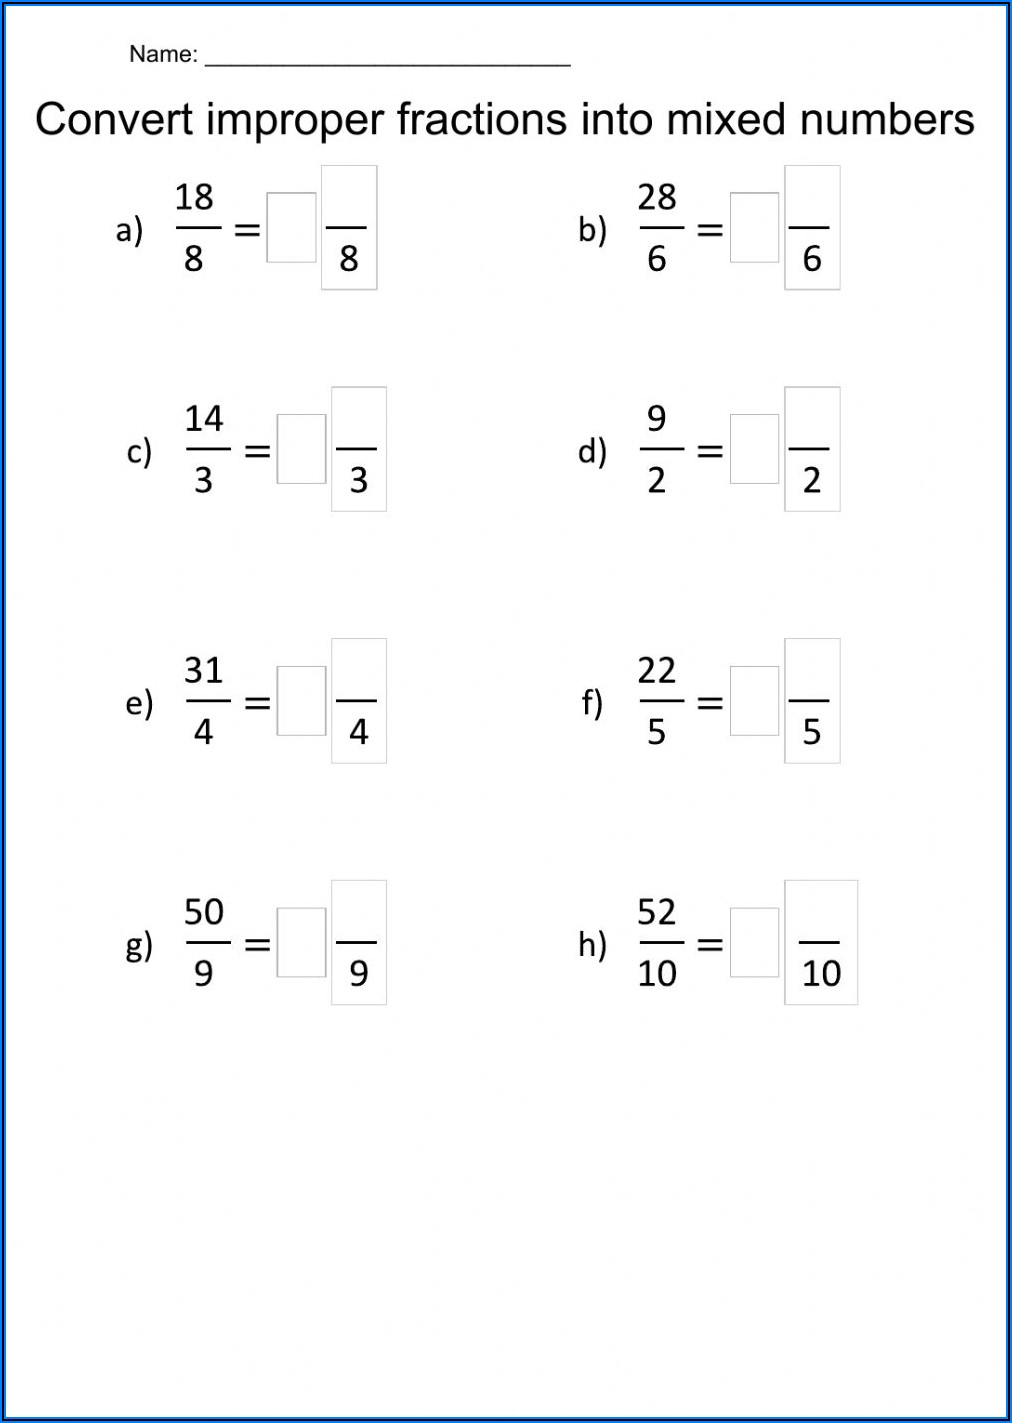 Improper Fraction Into Mixed Numbers Worksheet